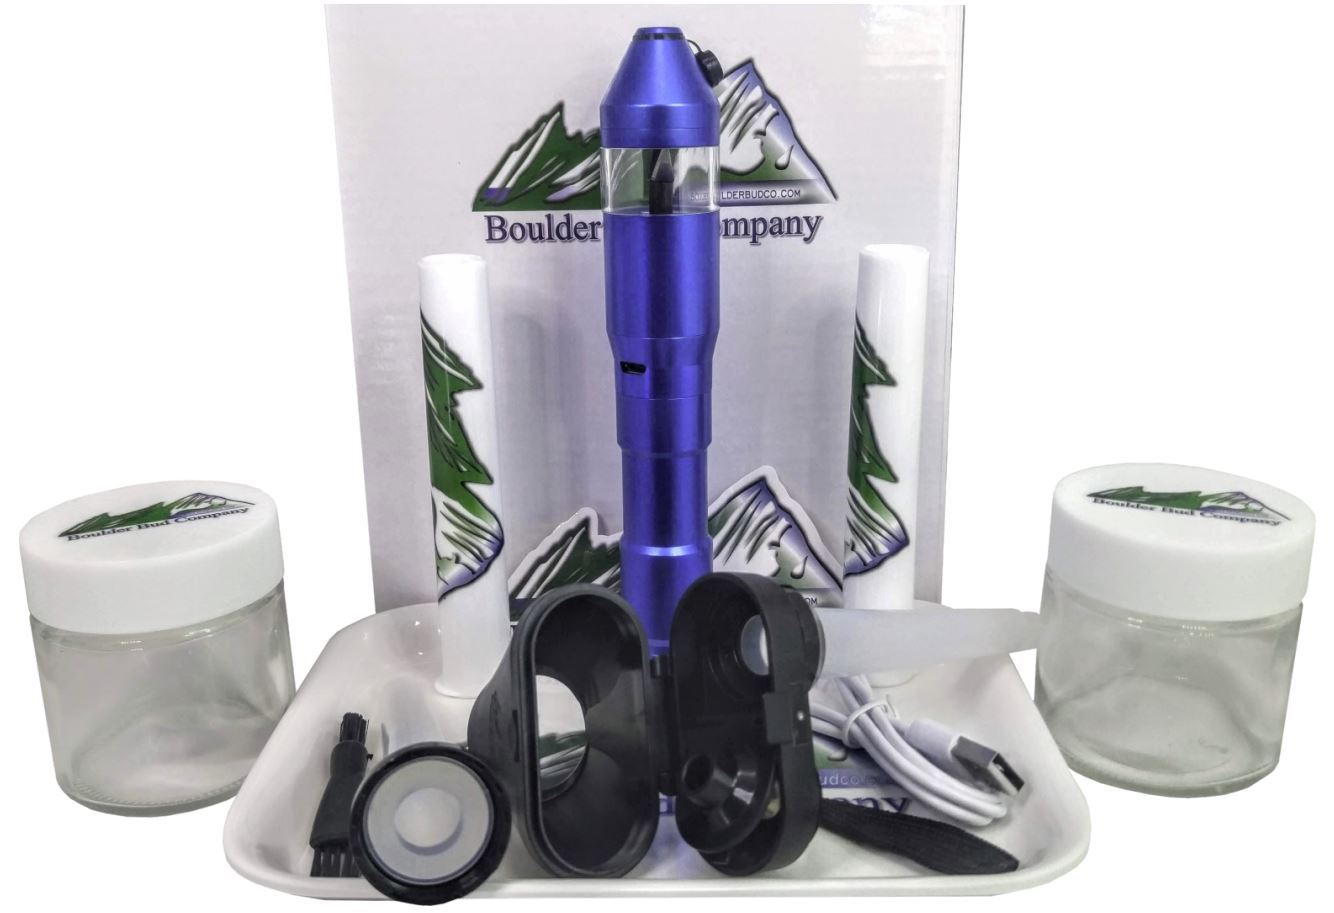 Electric Herb Grinder with Cone Filler (Blue)